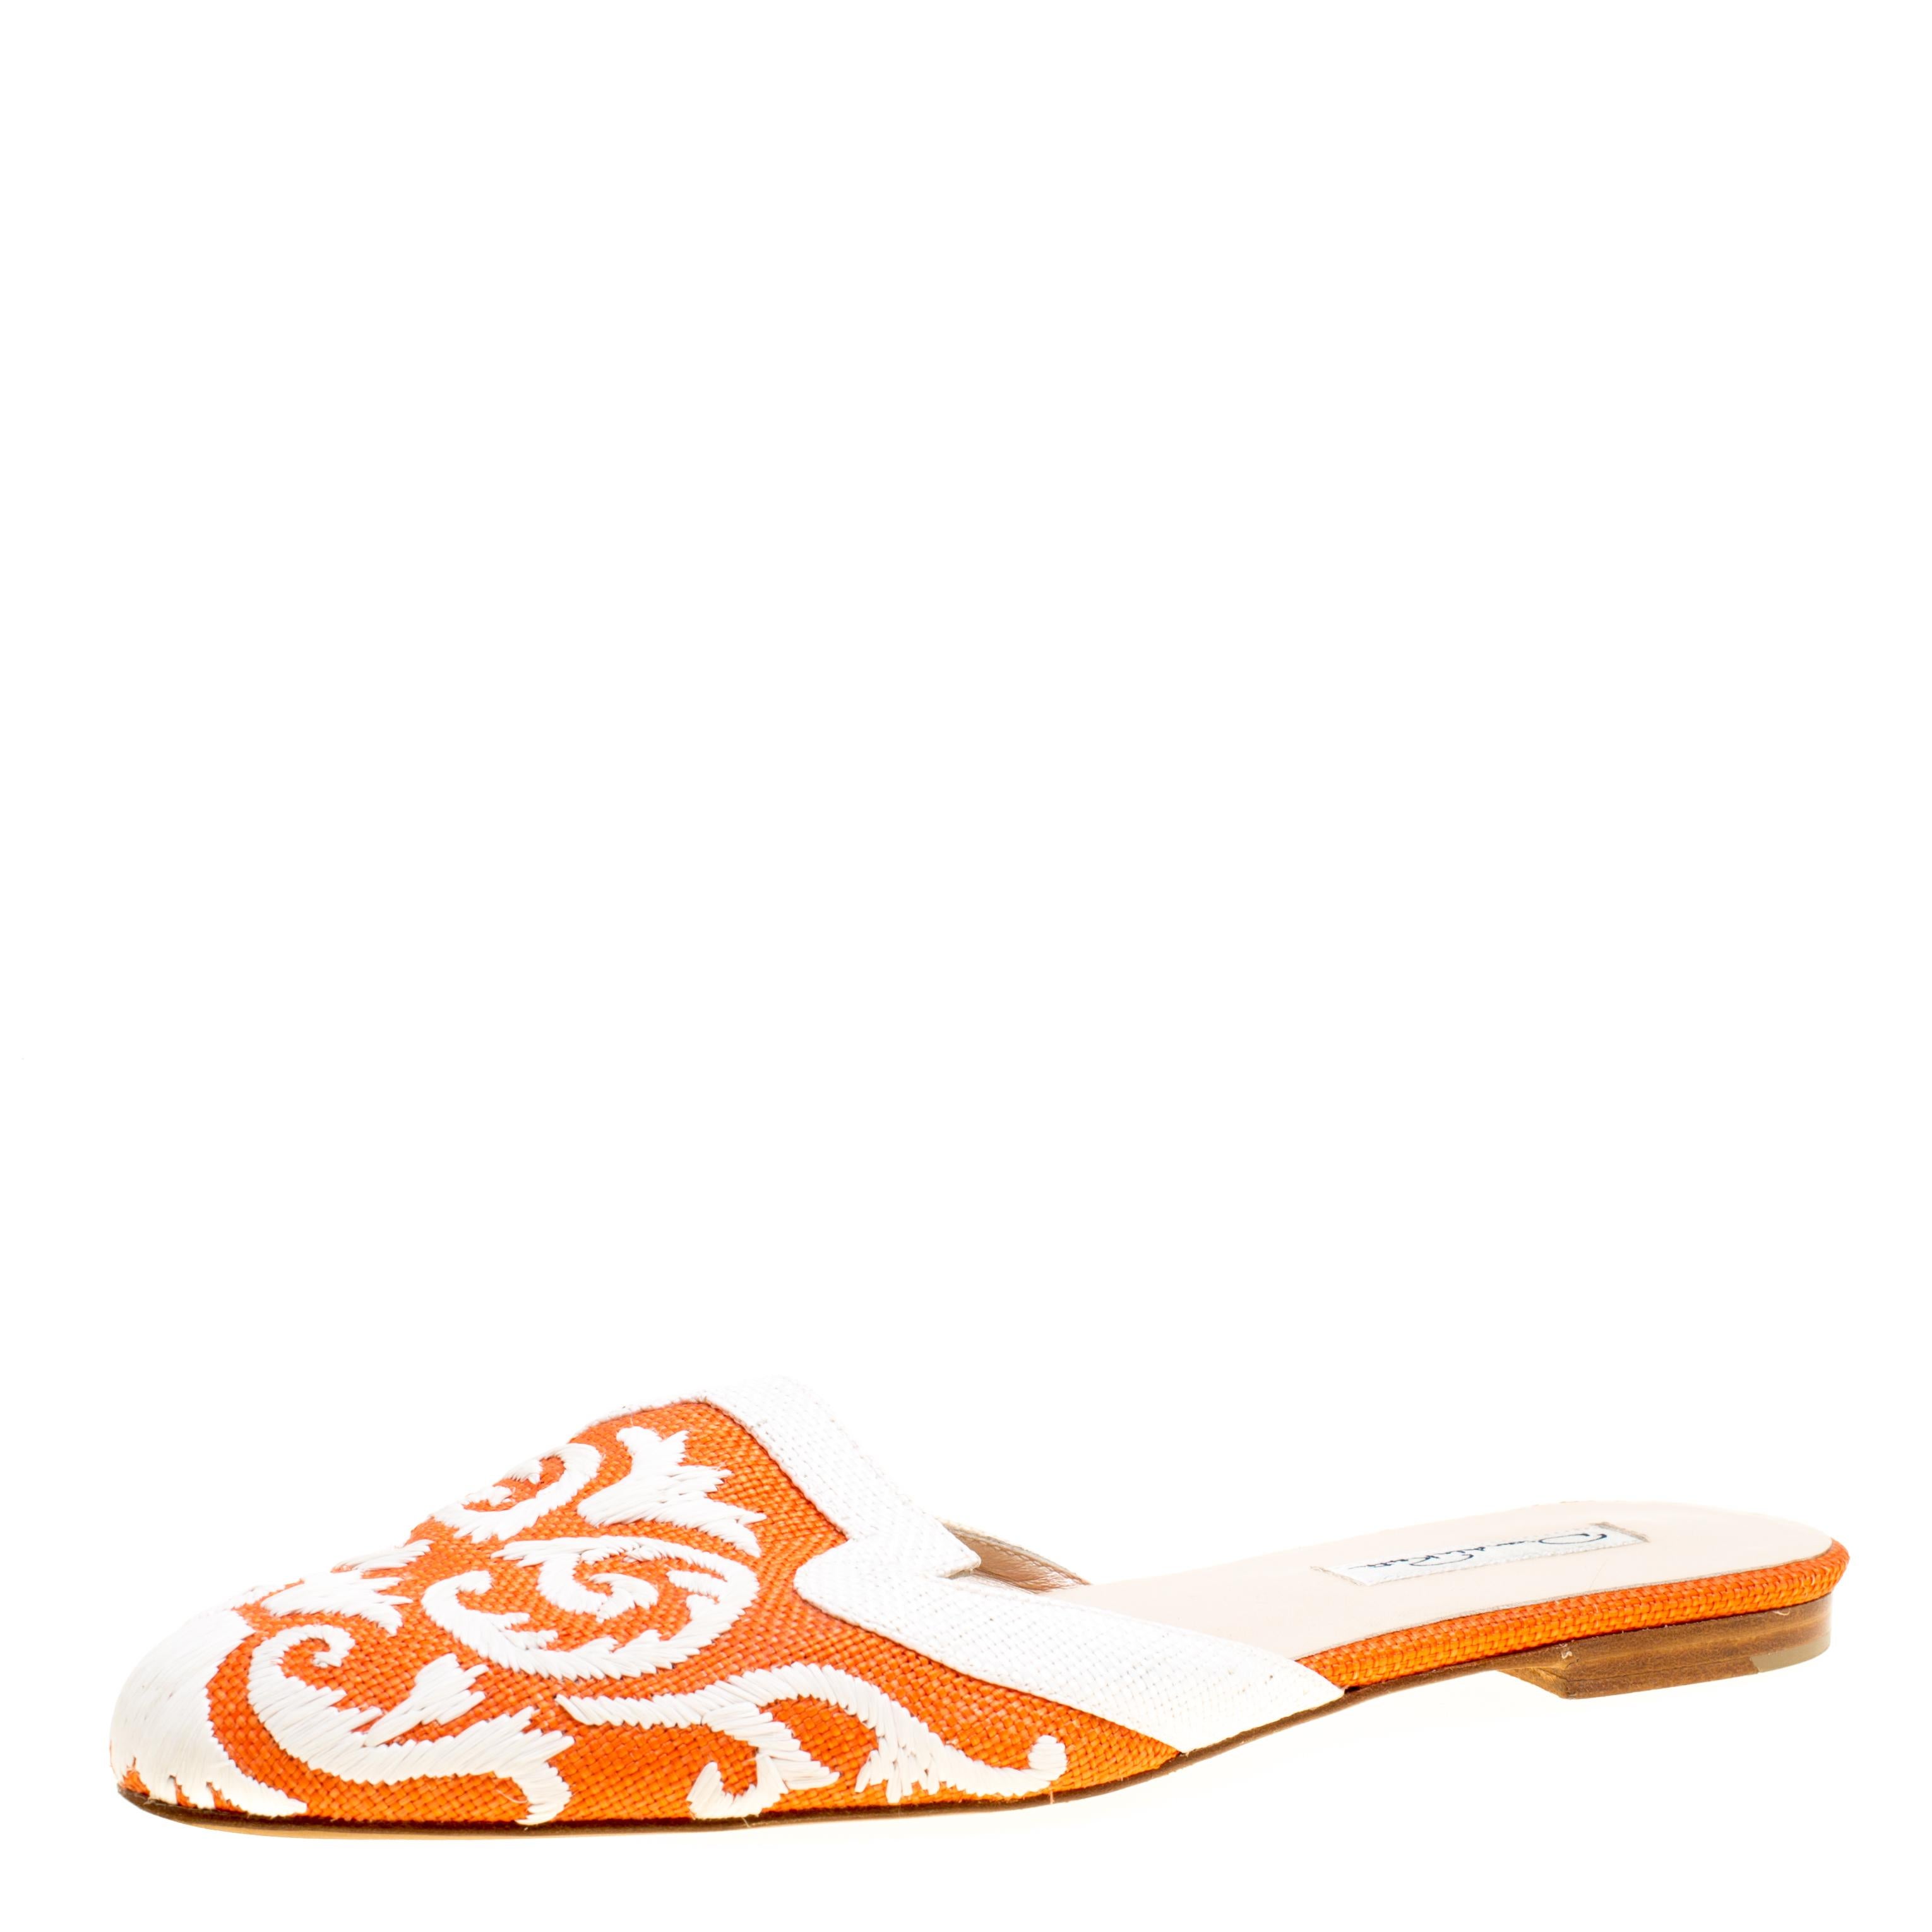 To complement your casual ensemble with the utmost ease and comfort comes these mules from Oscar de la Renta. Designed with almond toes and minimal heels, the orange raffia exterior of the pair is beautifully adorned with contrasting embroidery,